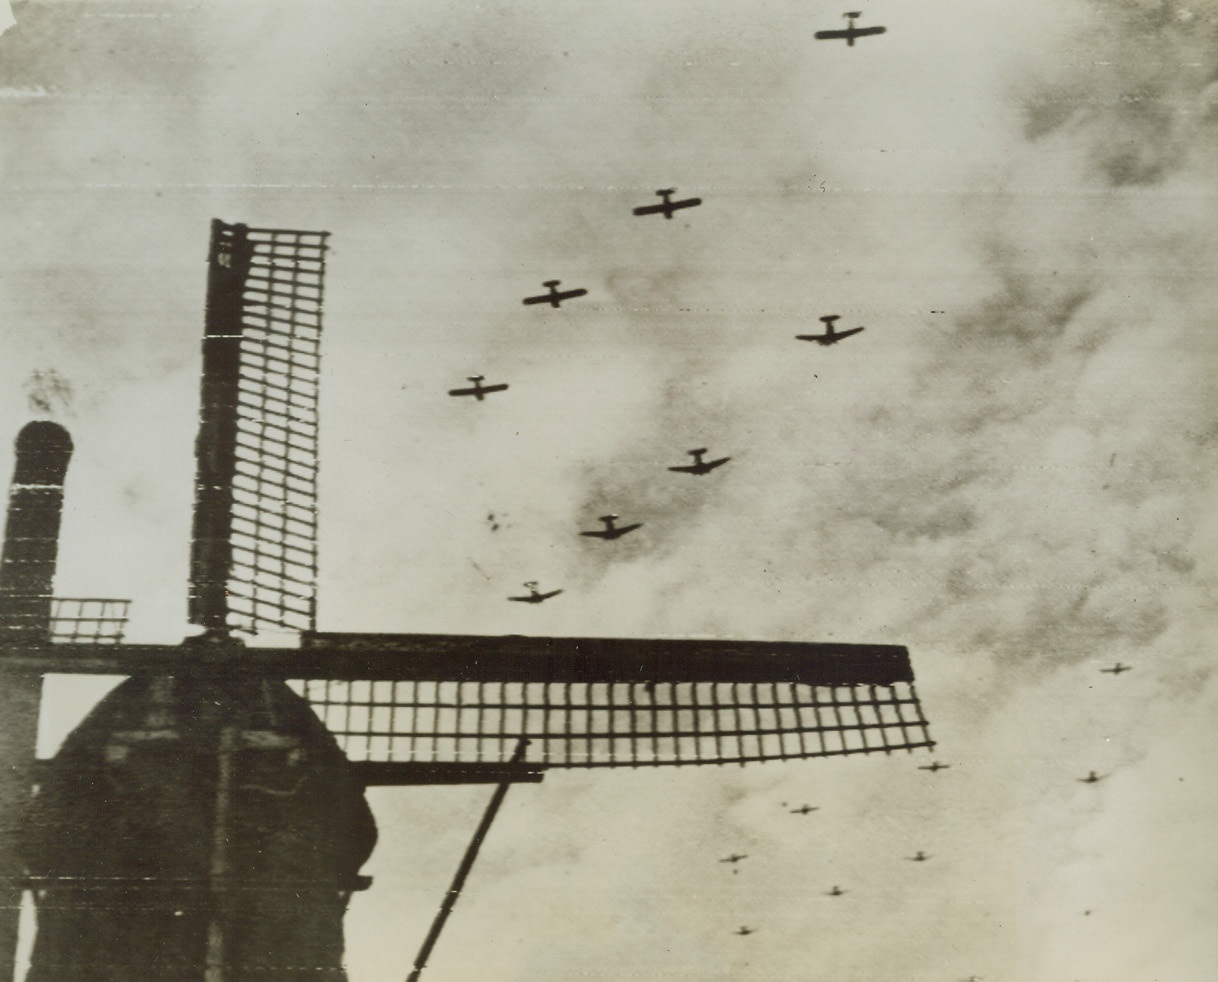 SUPPORT FOR TRAPPED TROOPS, 9/25/1944. American two planes with their gliders, pass over a windmill at Valkenswaad, near Eindhoven, Holland, on their way with reinforcements for airborne troops trapped at Arnhem. Credit: British official photo via U.S. Army radiotelephoto from Acme;